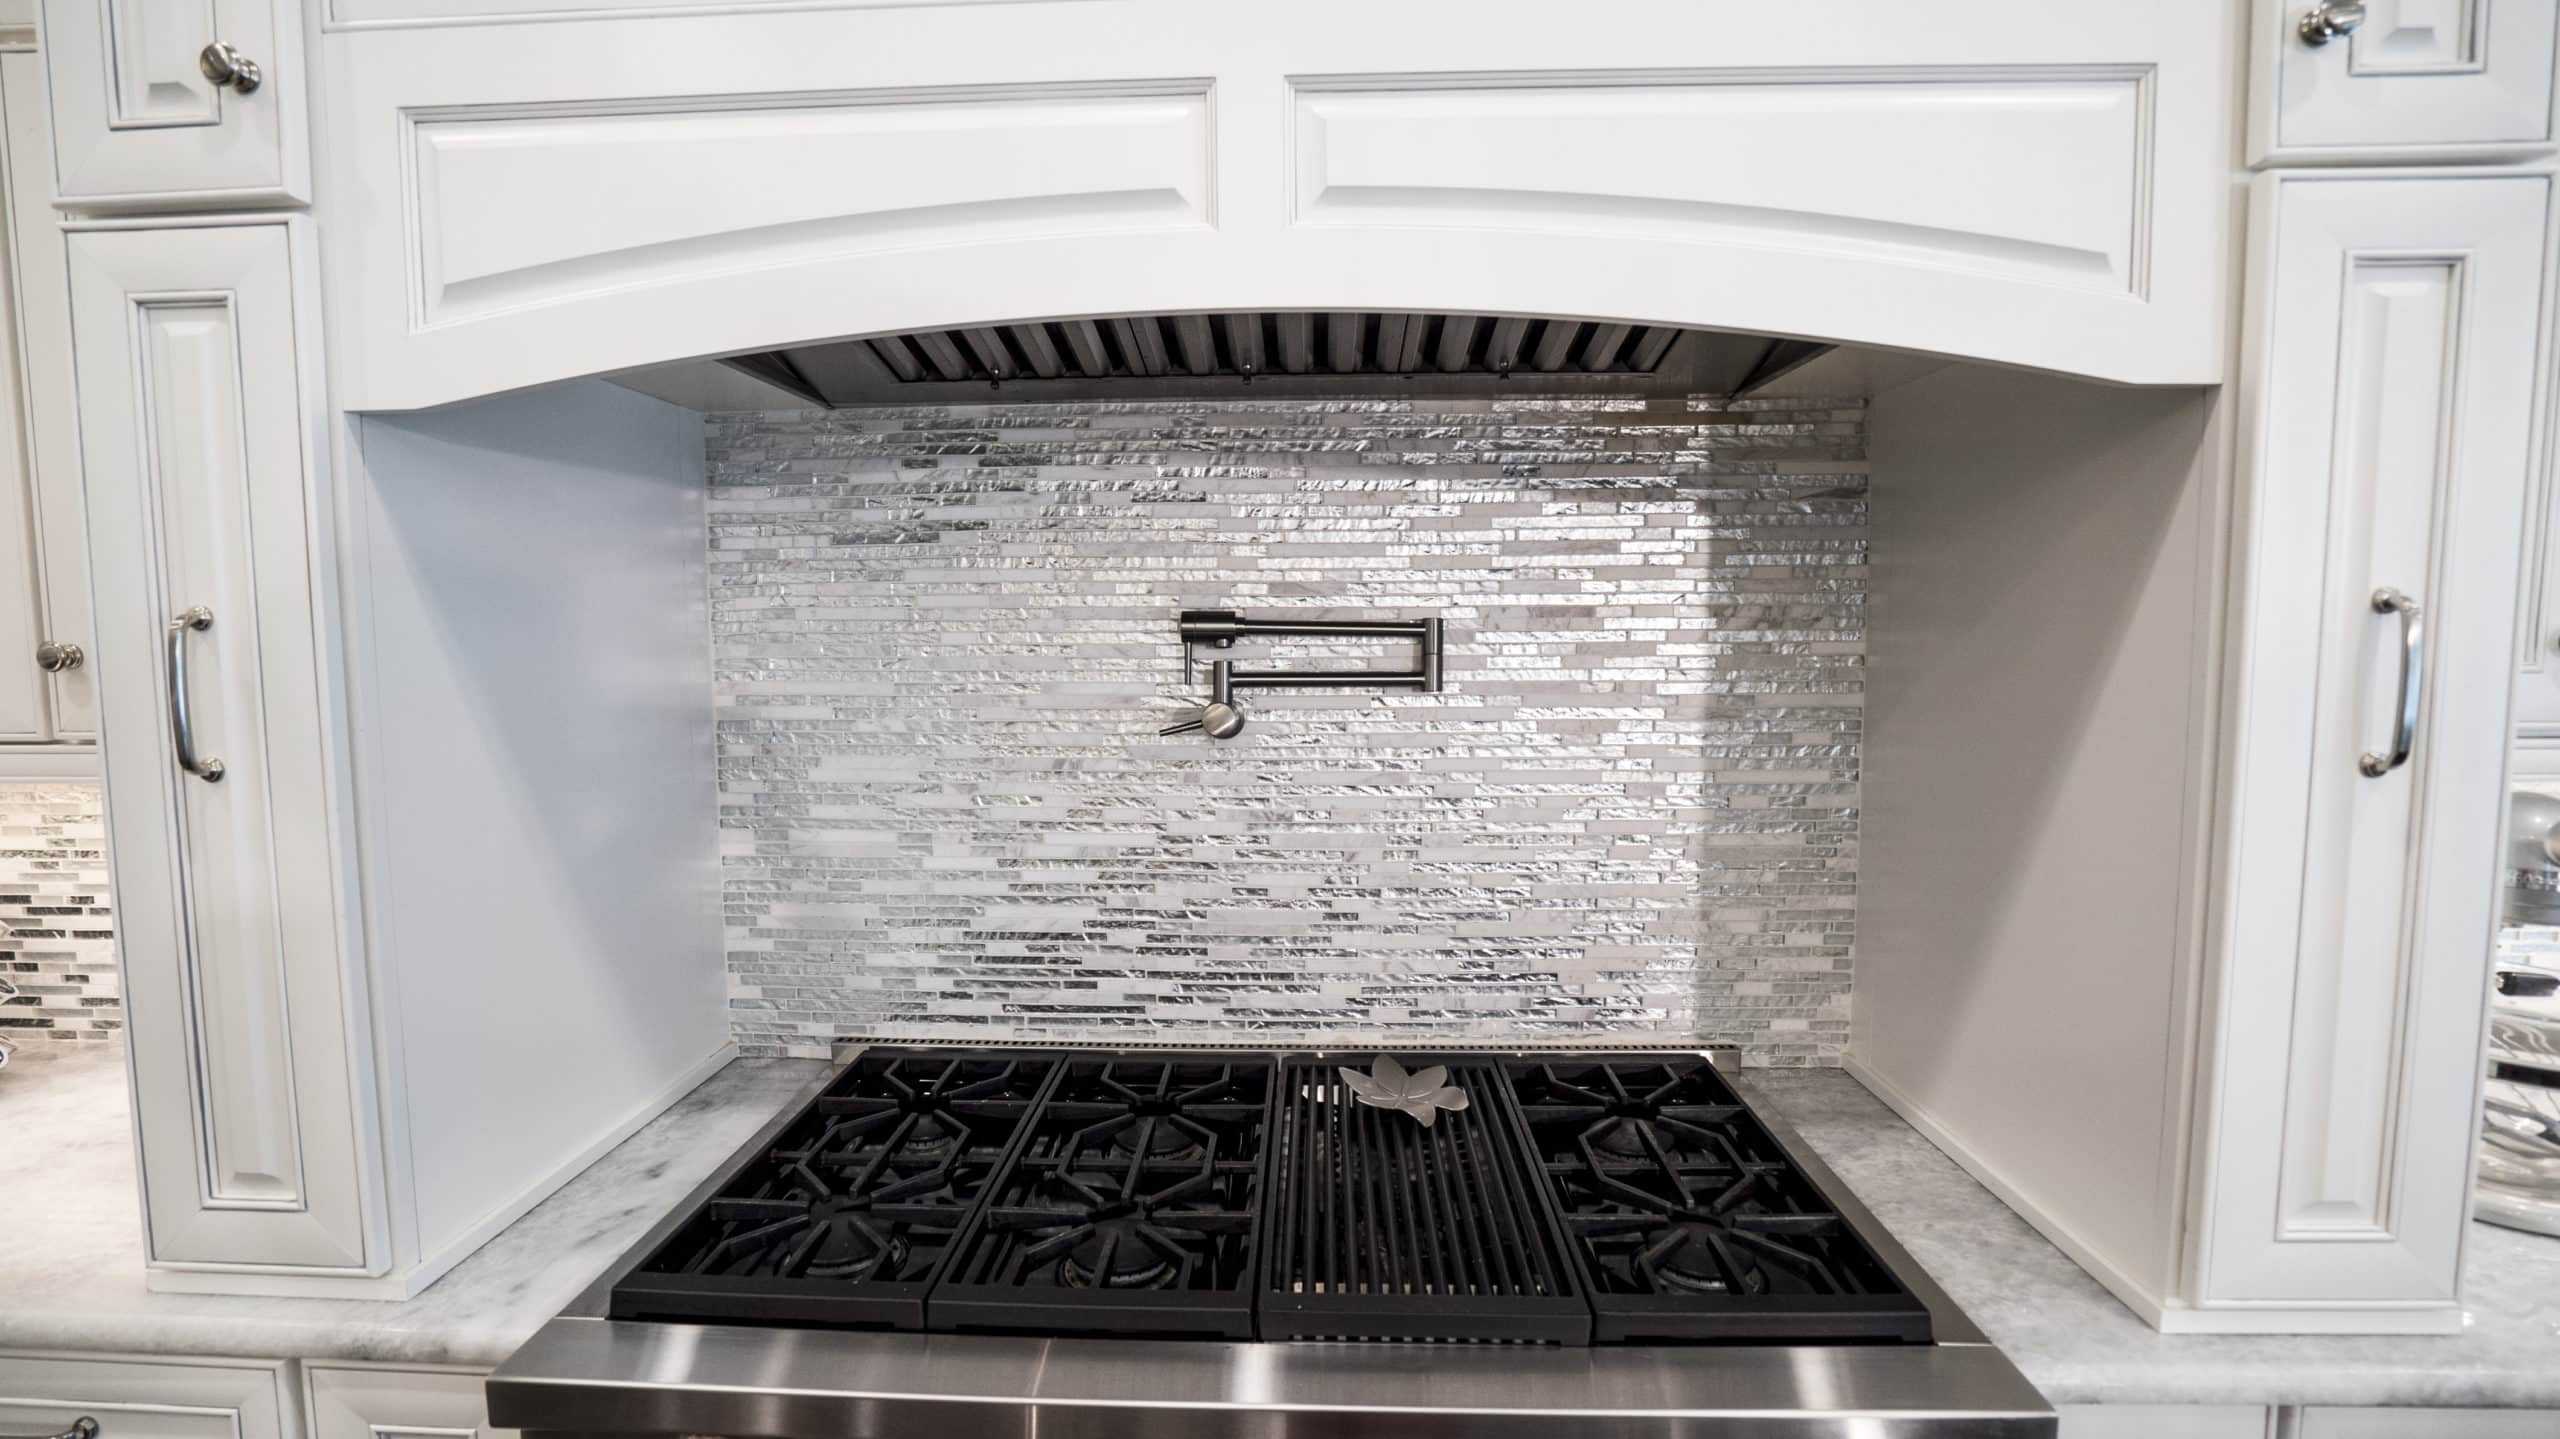 A stainless steel stove in a kitchen with white cabinets